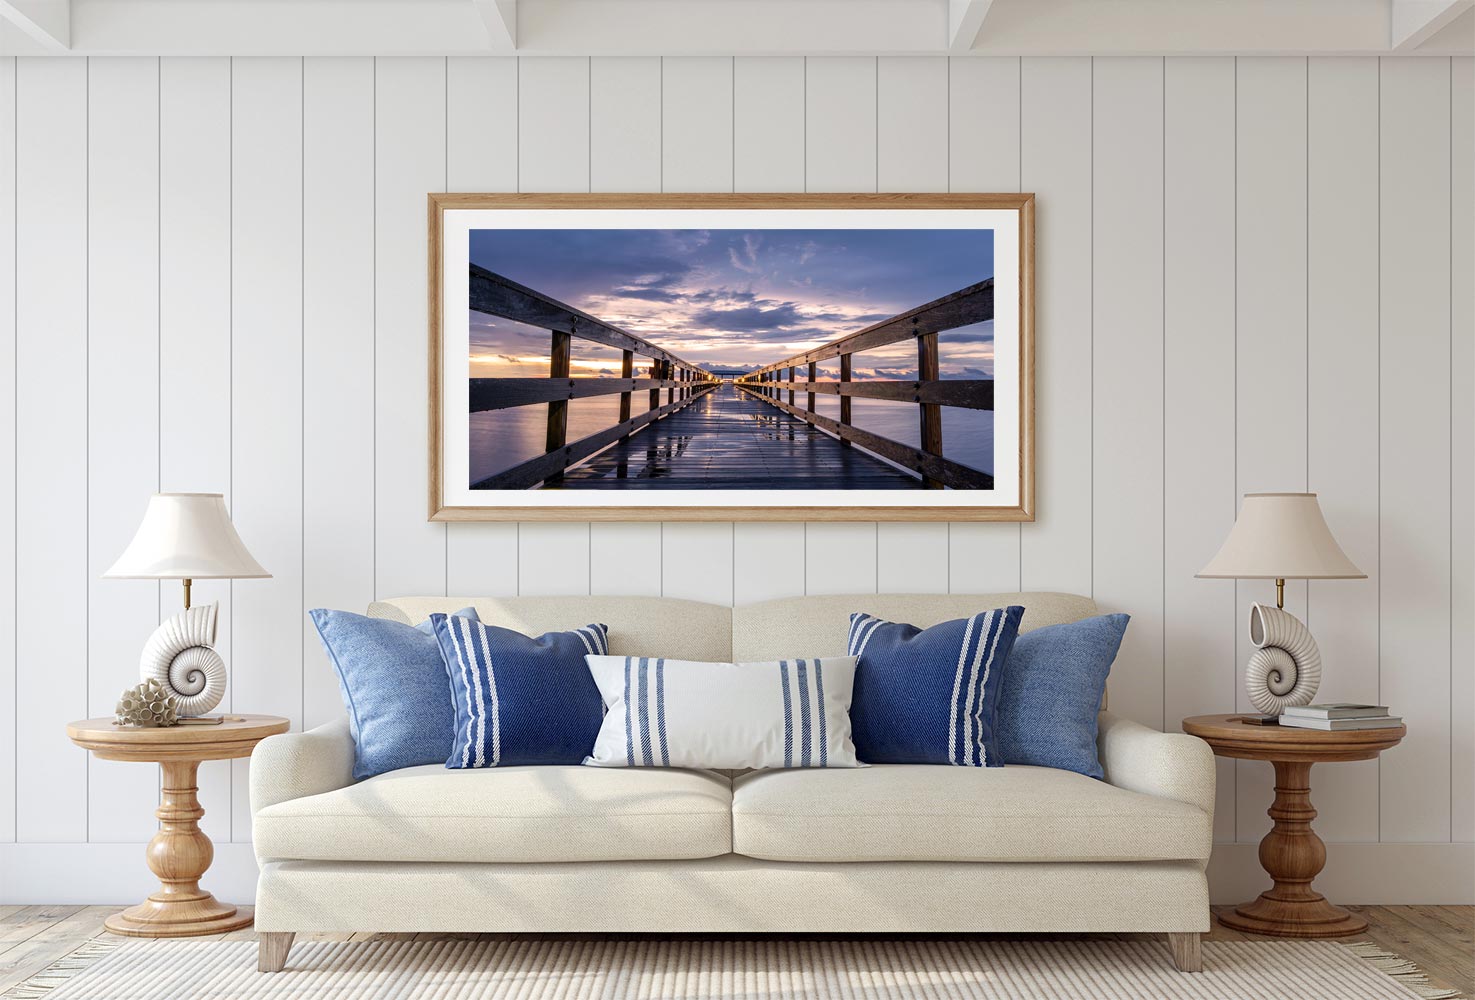 Wall Mockup of Drawn to Morning – A Safety Harbor Blue Hour Photograph by Florida Landscape Photographer Brian Jones of 1350 West LLC